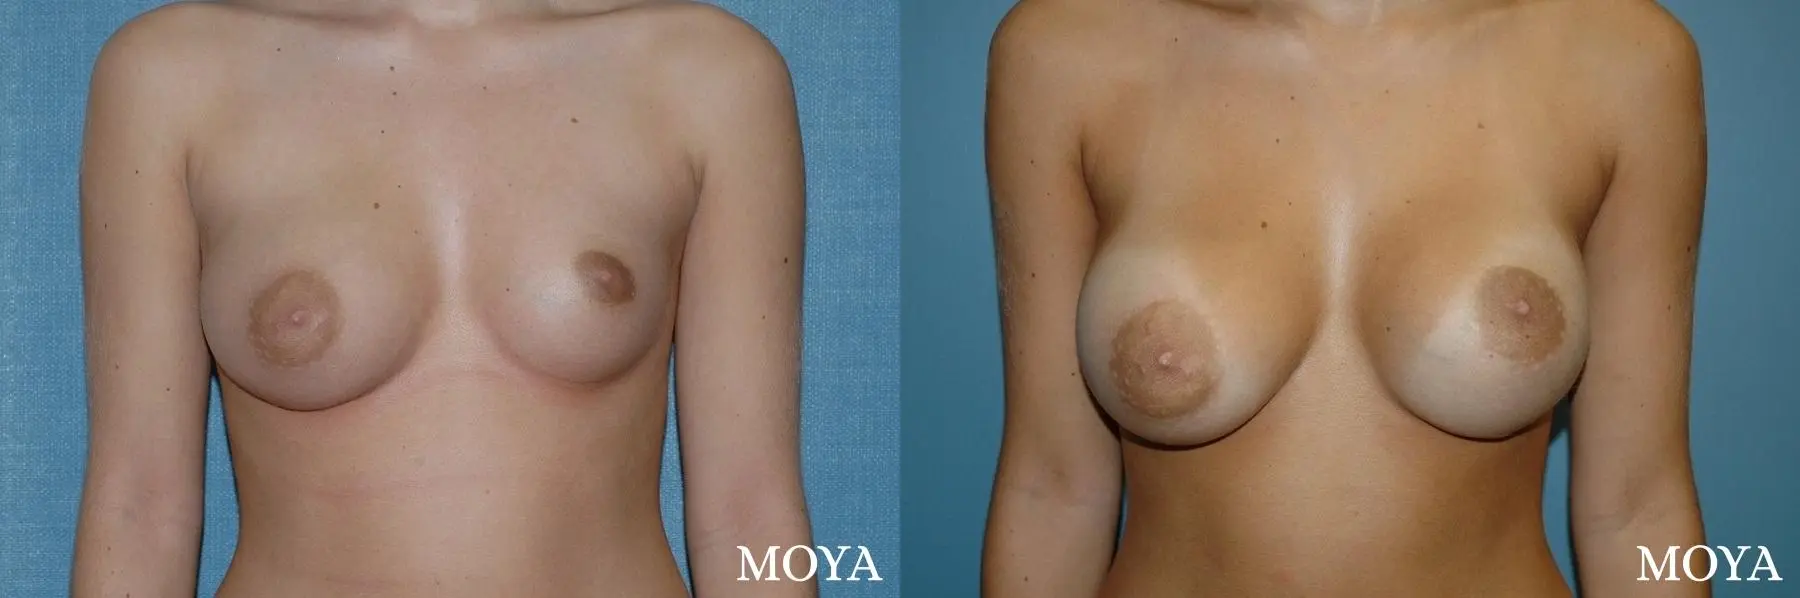 Breast Asymmetry: Patient 1 - Before and After 1